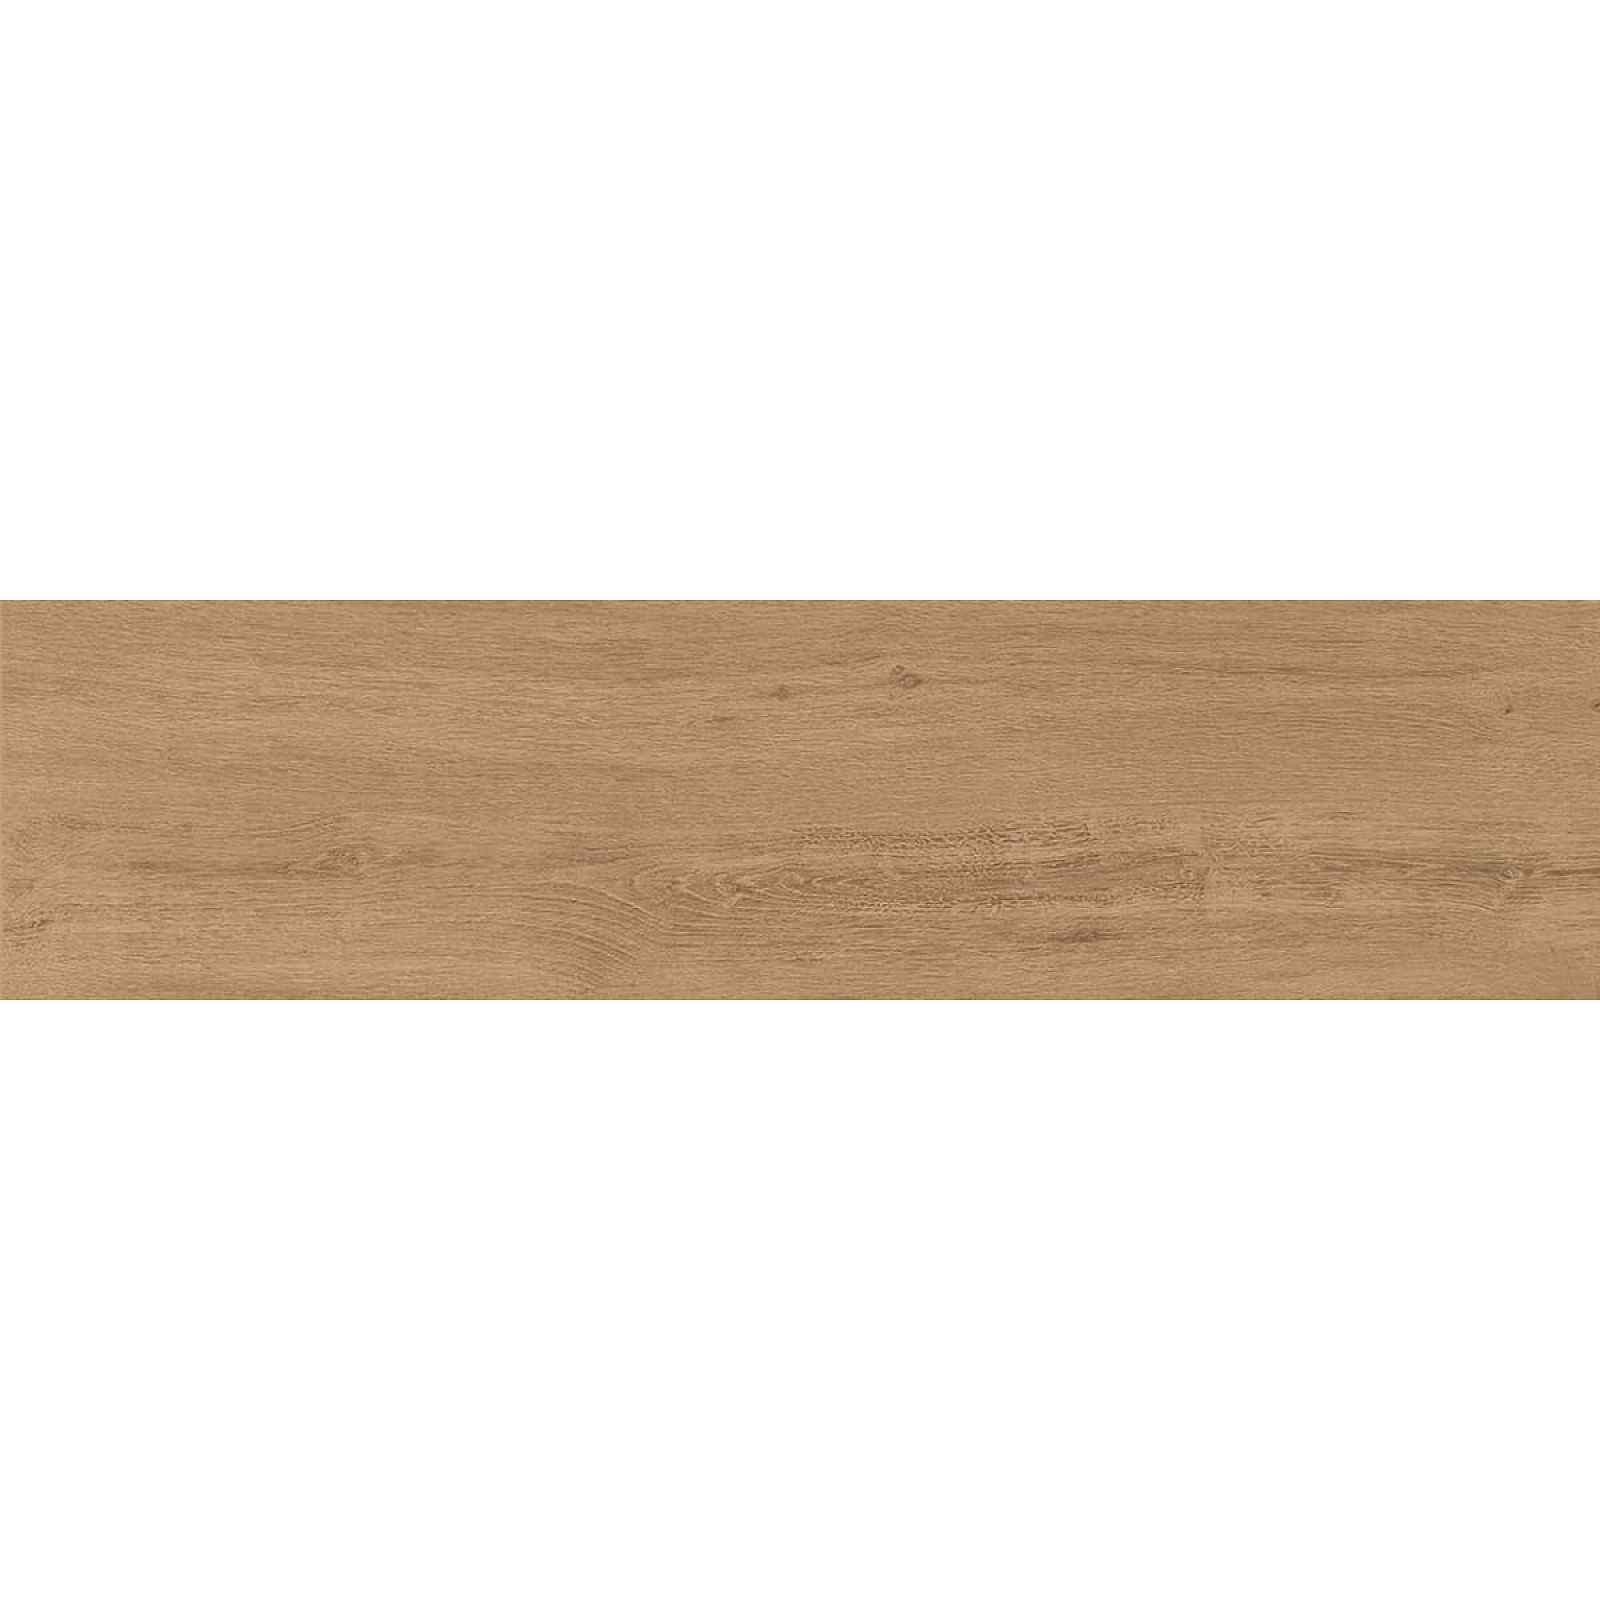 Timber Natural Beige Scuro 29,8x119,8cm